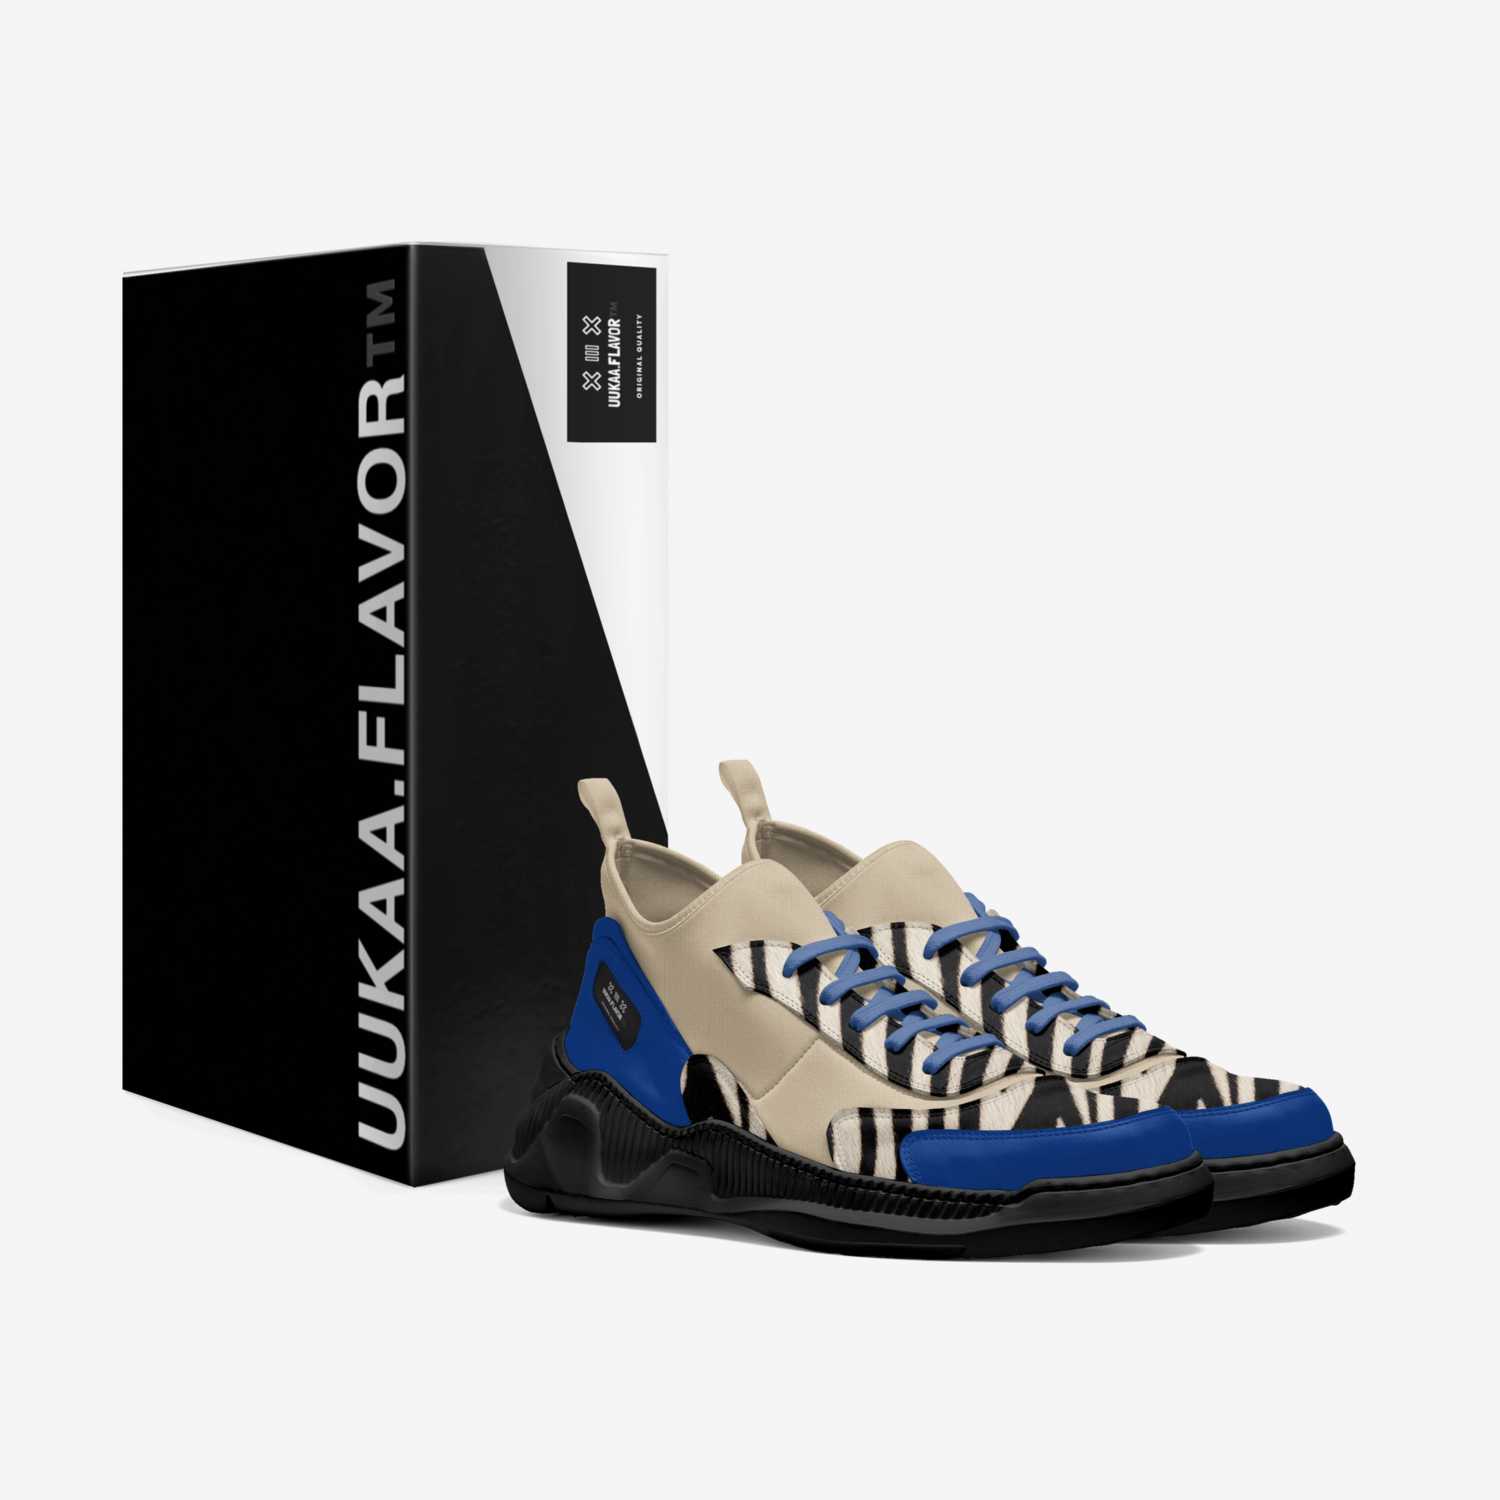 UUKAA.FLAVOR™️ custom made in Italy shoes by Burnell Lymon Jr | Box view